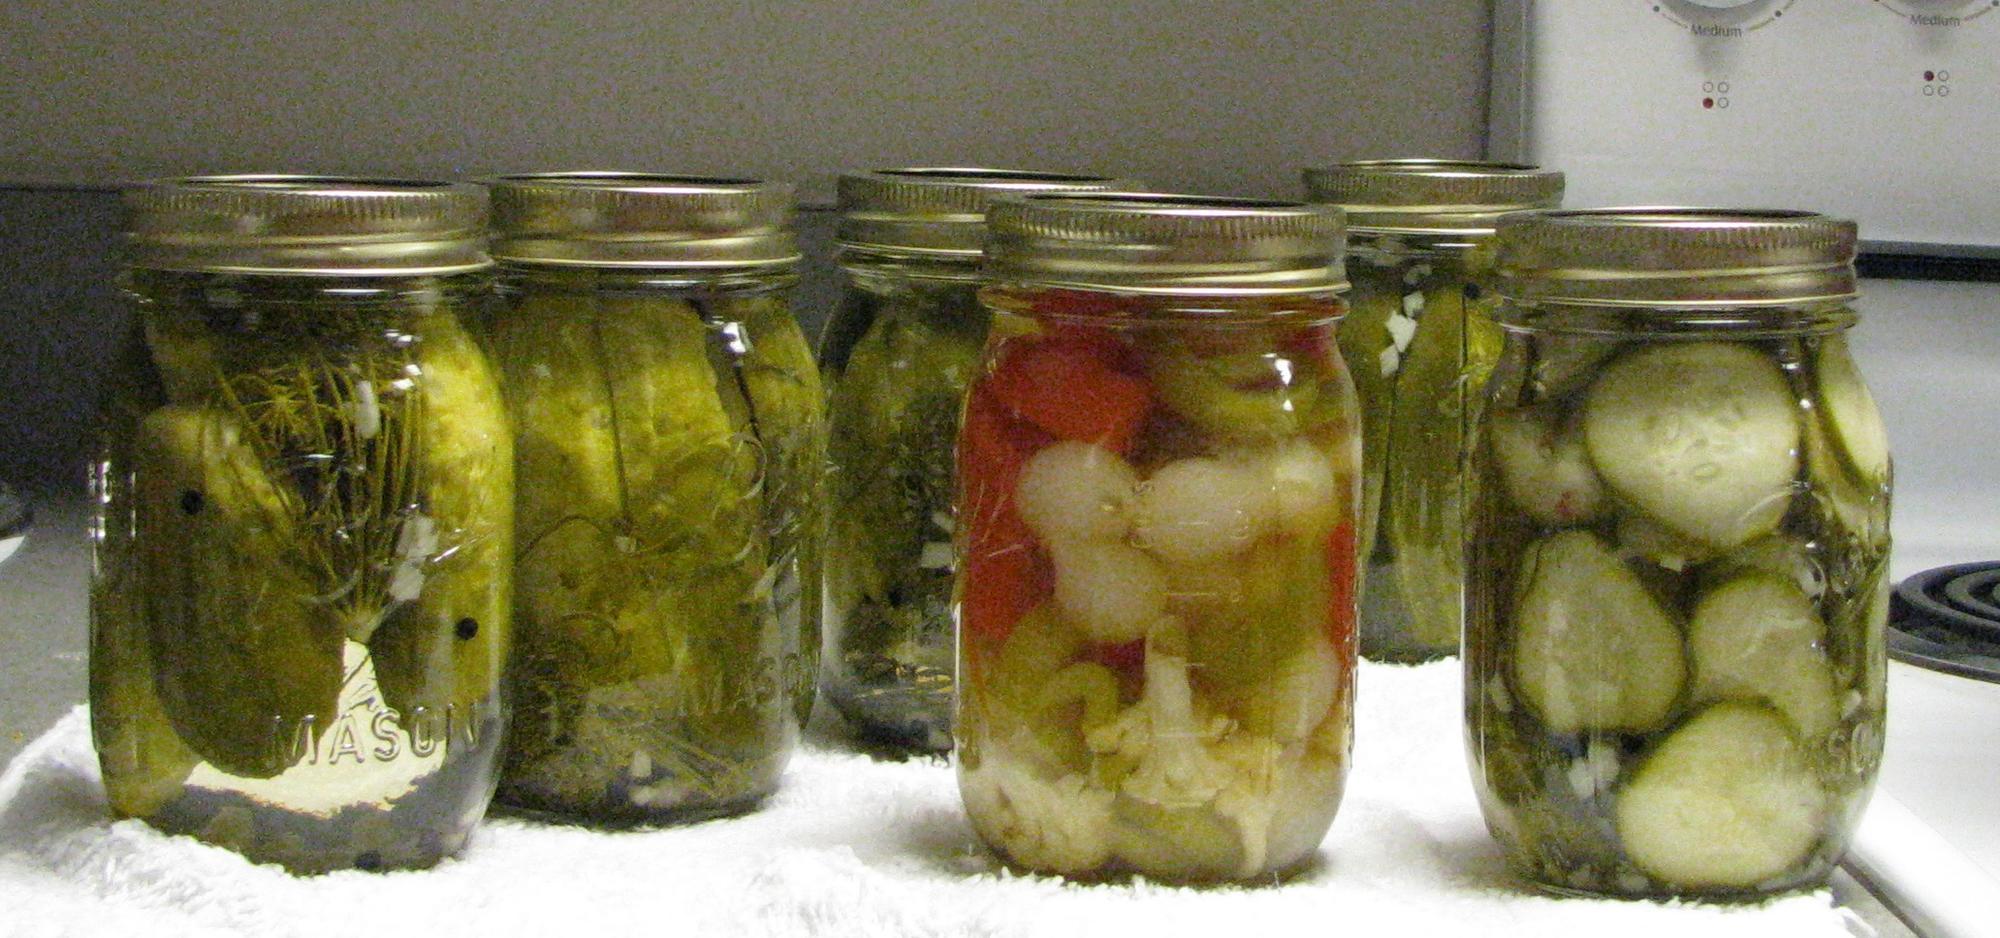 An eye-level view of five jars of pickles and one jar of pickled mixed vegetables.